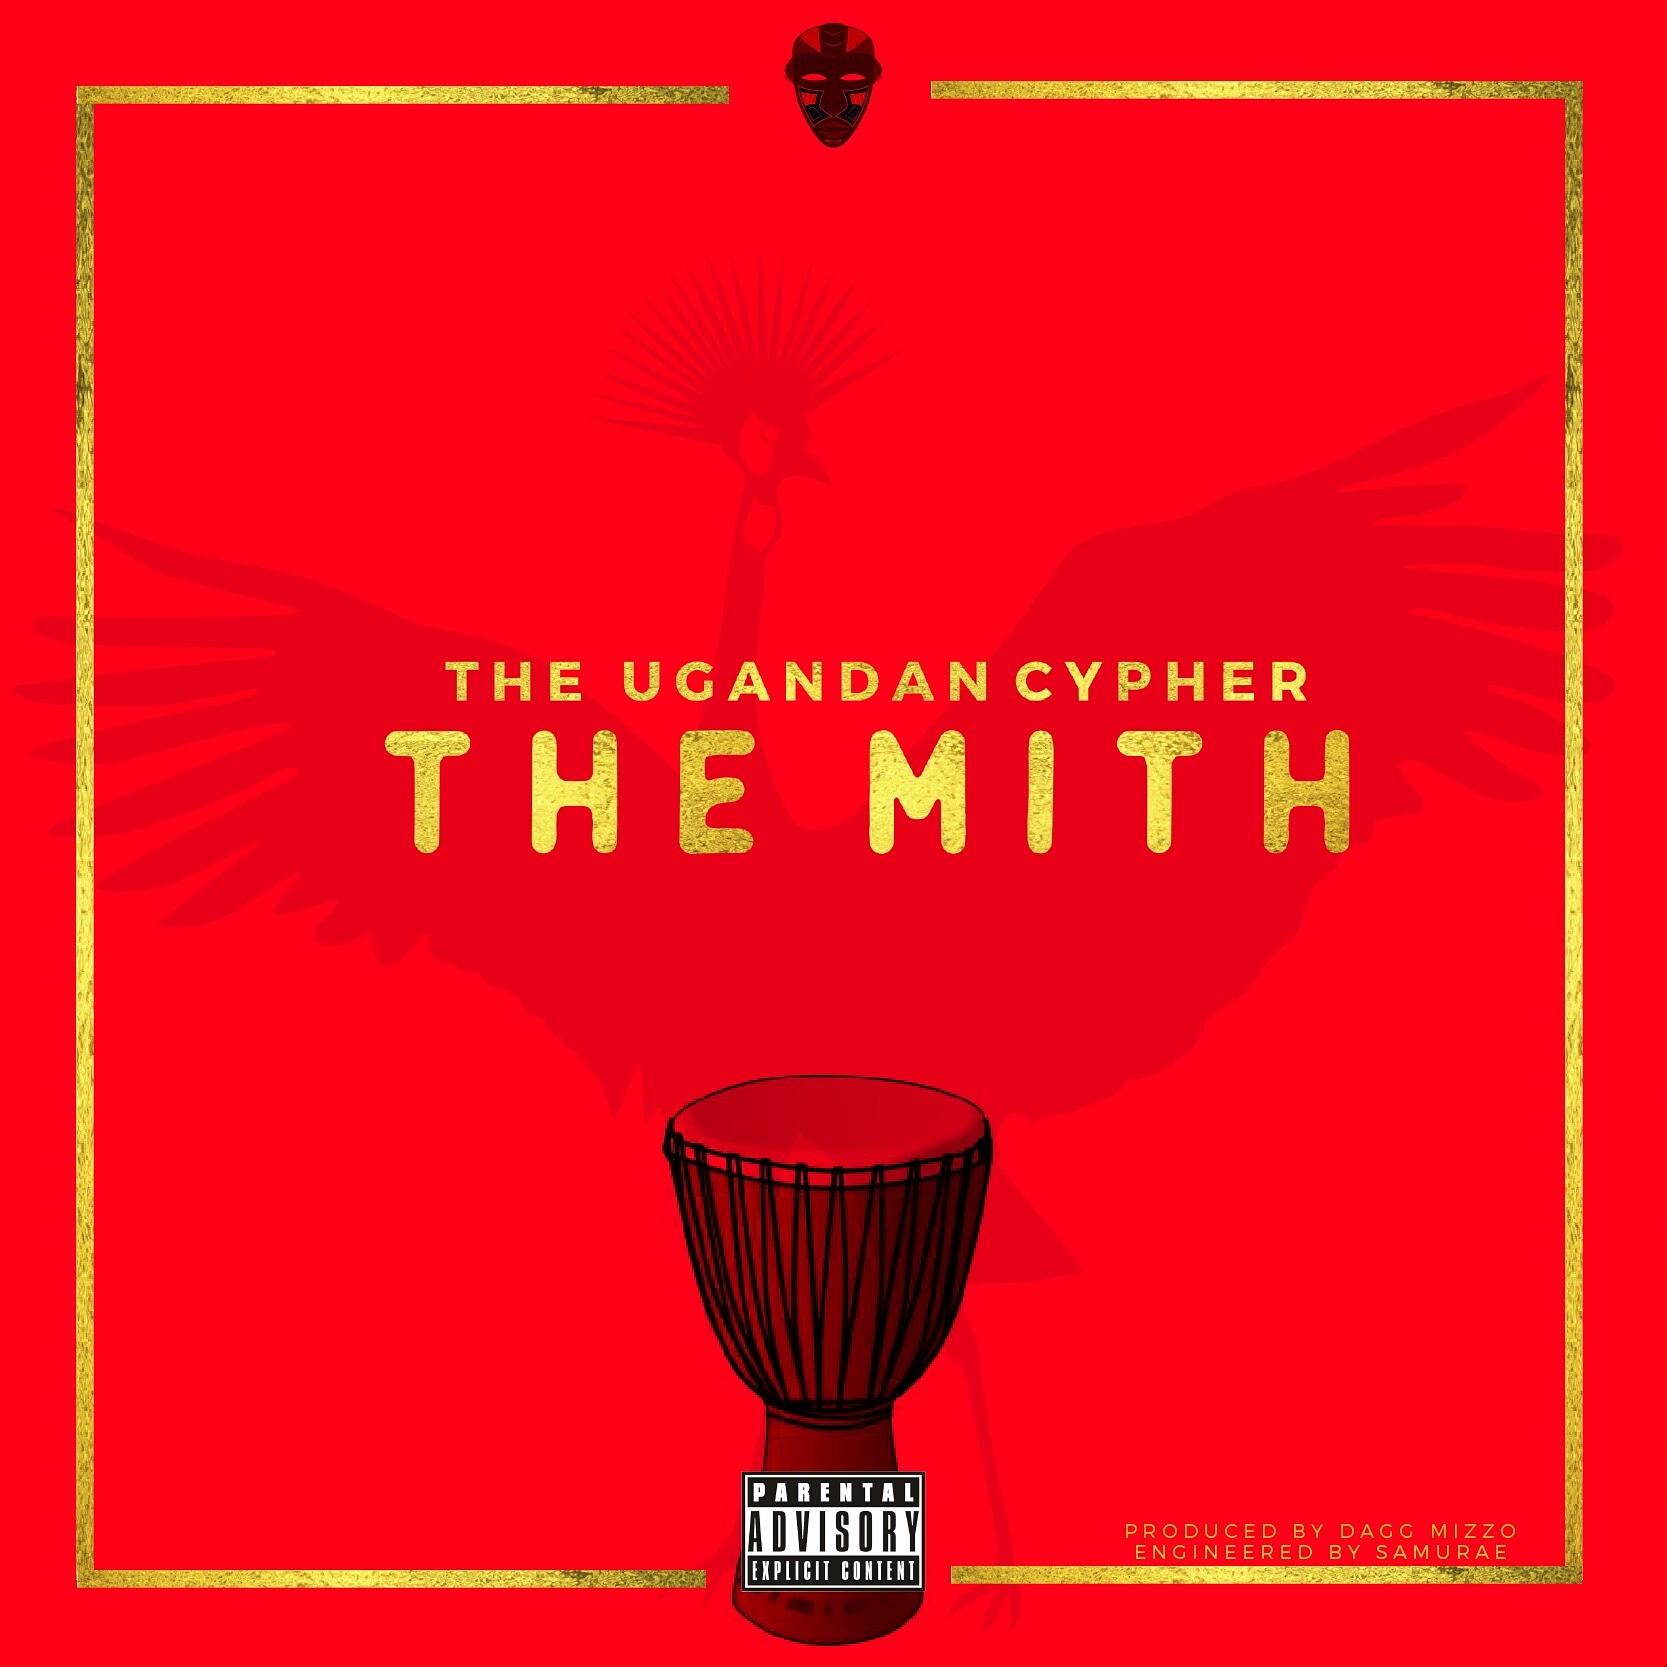 The Mith has released “The Ugandan Cypher Part 1” official audio – Stream NOW